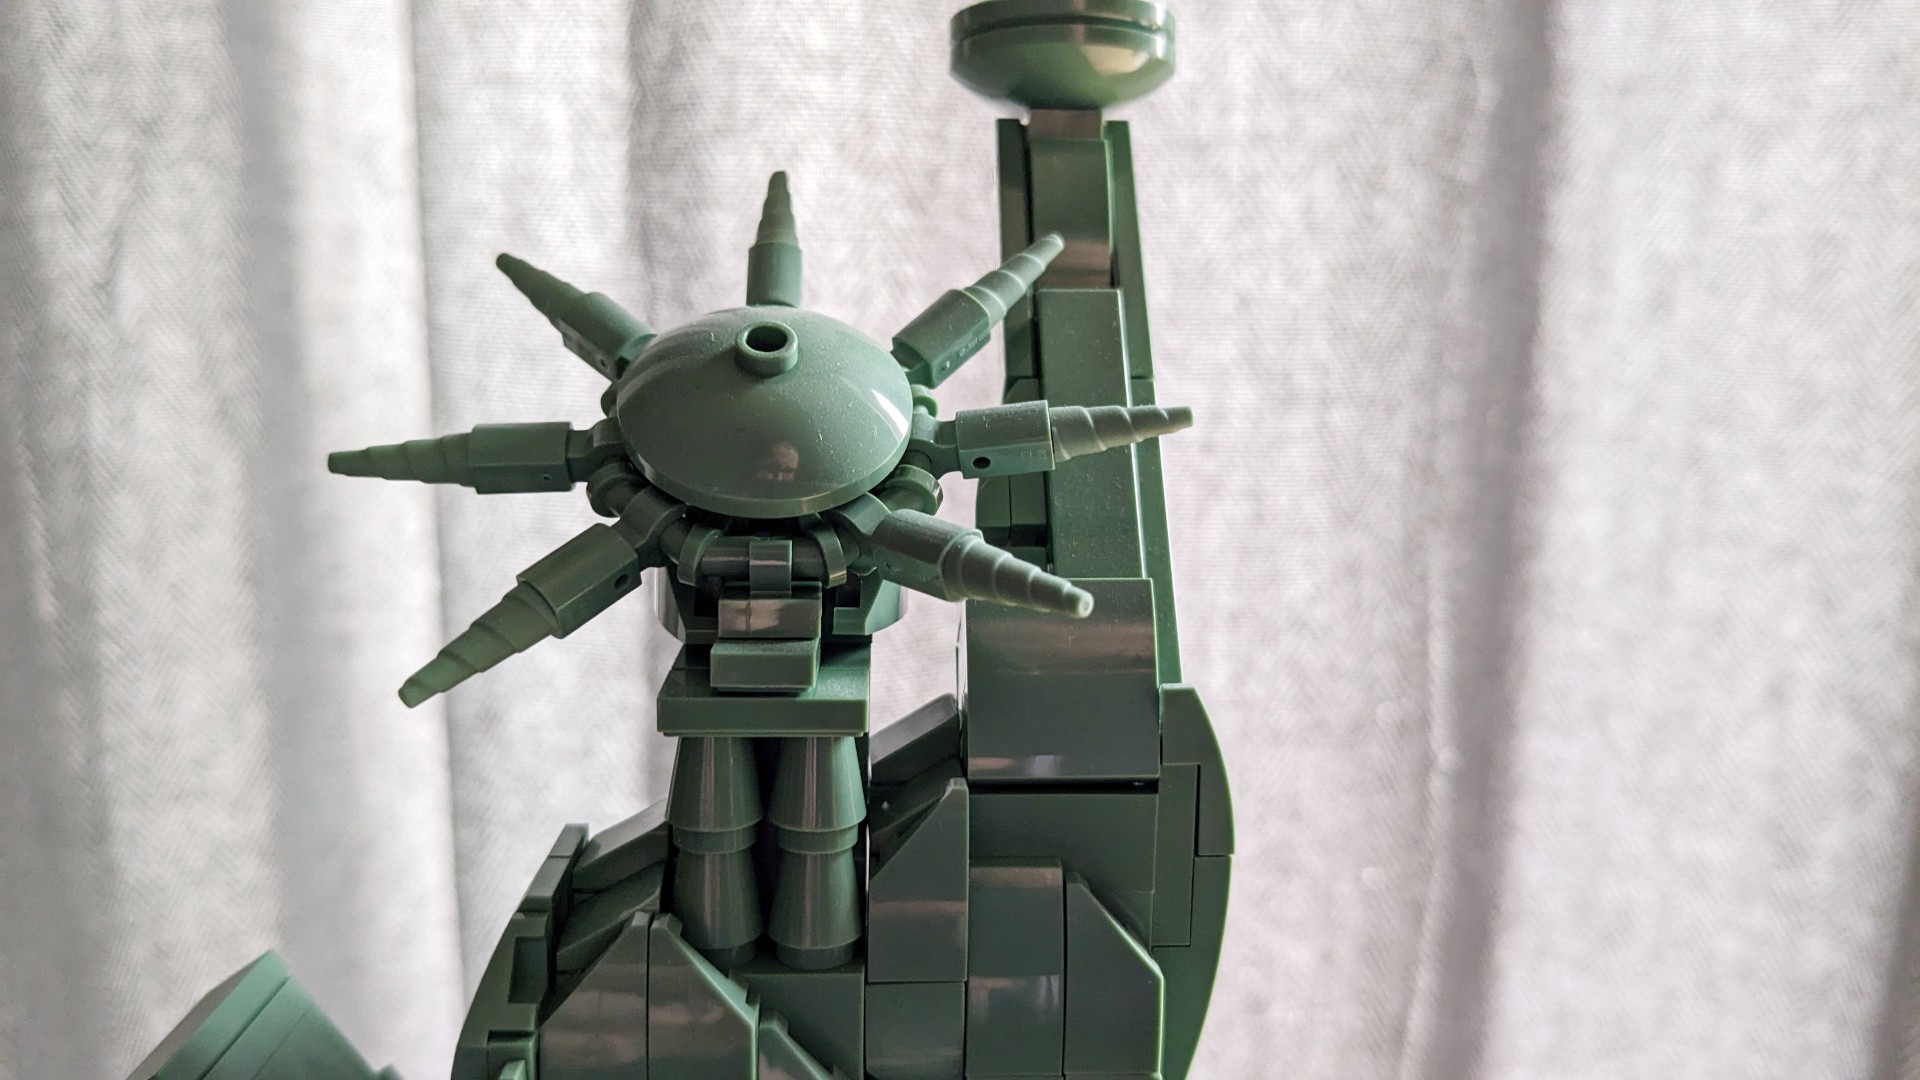 Lego Architecture Statue of Liberty 21042 - back of head and crown.